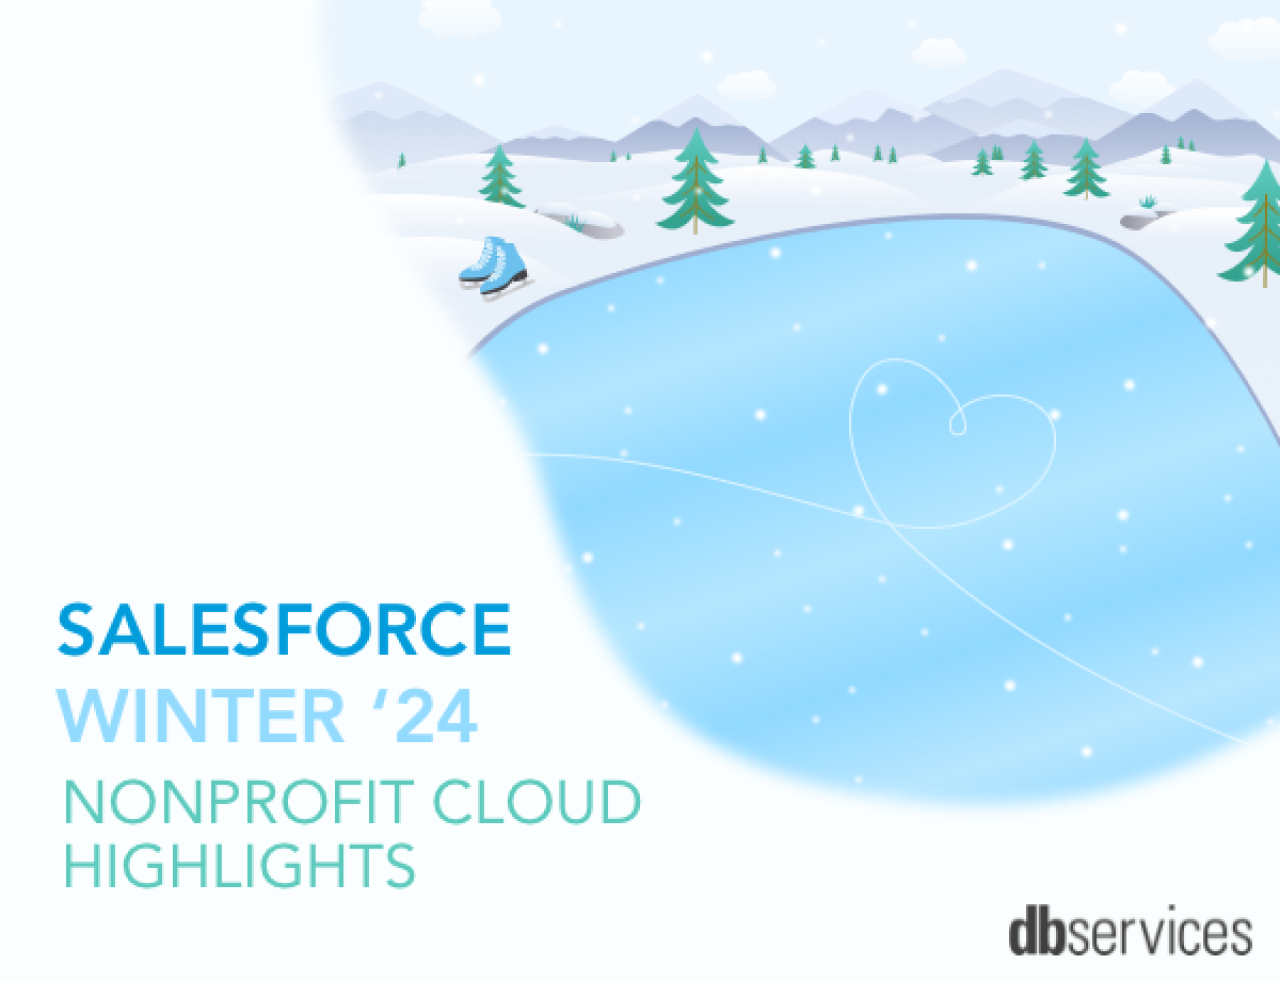 salesforce winter '24 nonprofit cloud release highlights db services.